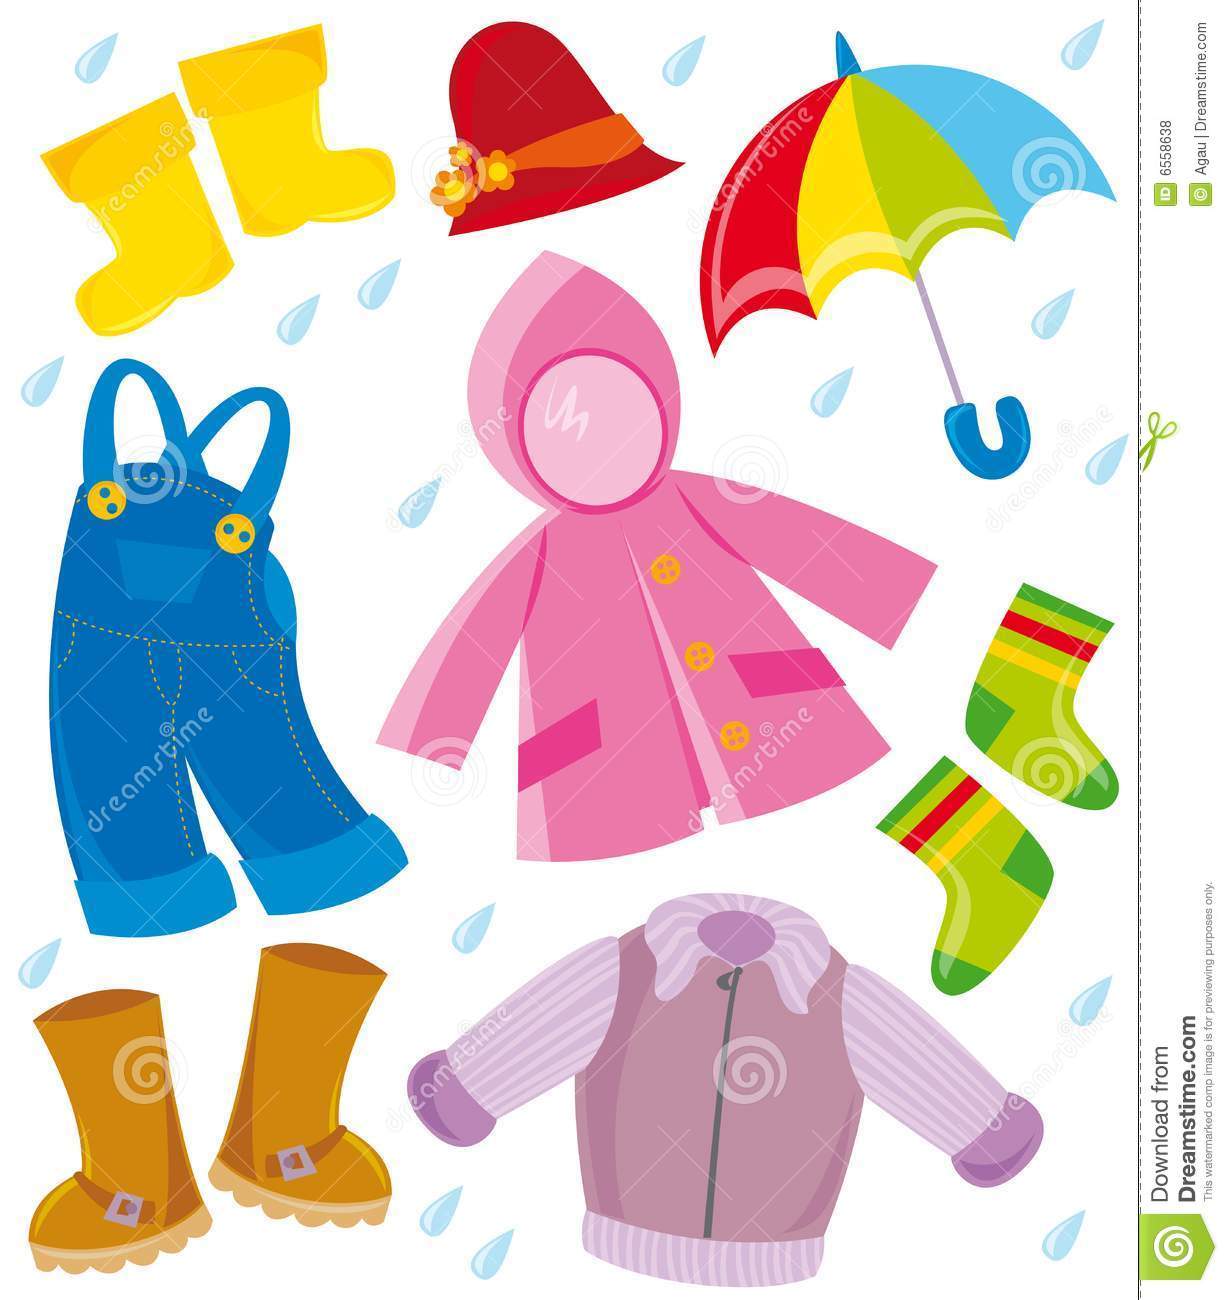 Spring clothing clipart